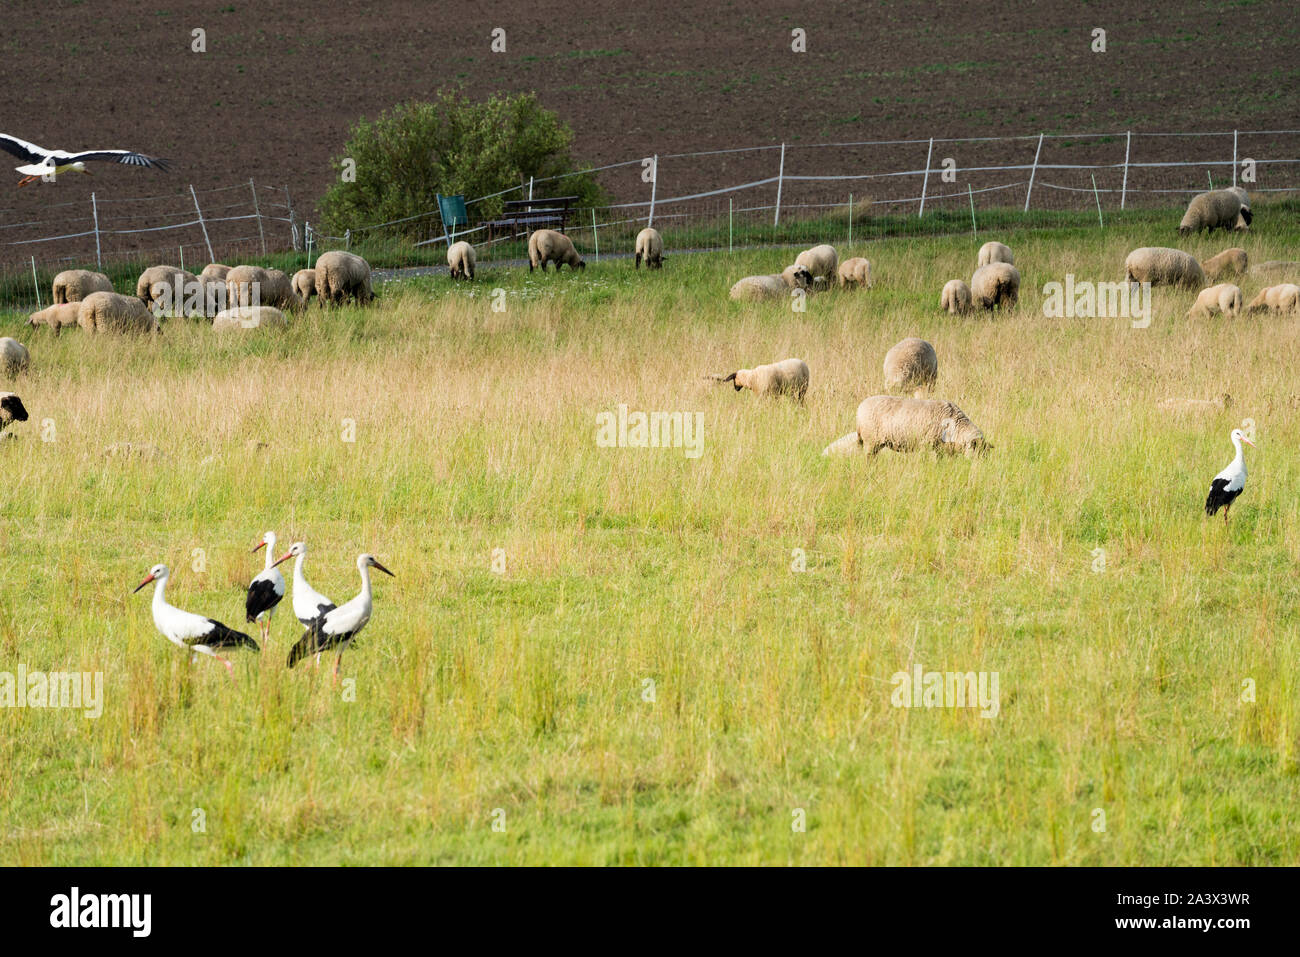 Cicogne bianche con le pecore, Oberweser, Weser Uplands, Weserbergland, Hesse, Germania Foto Stock